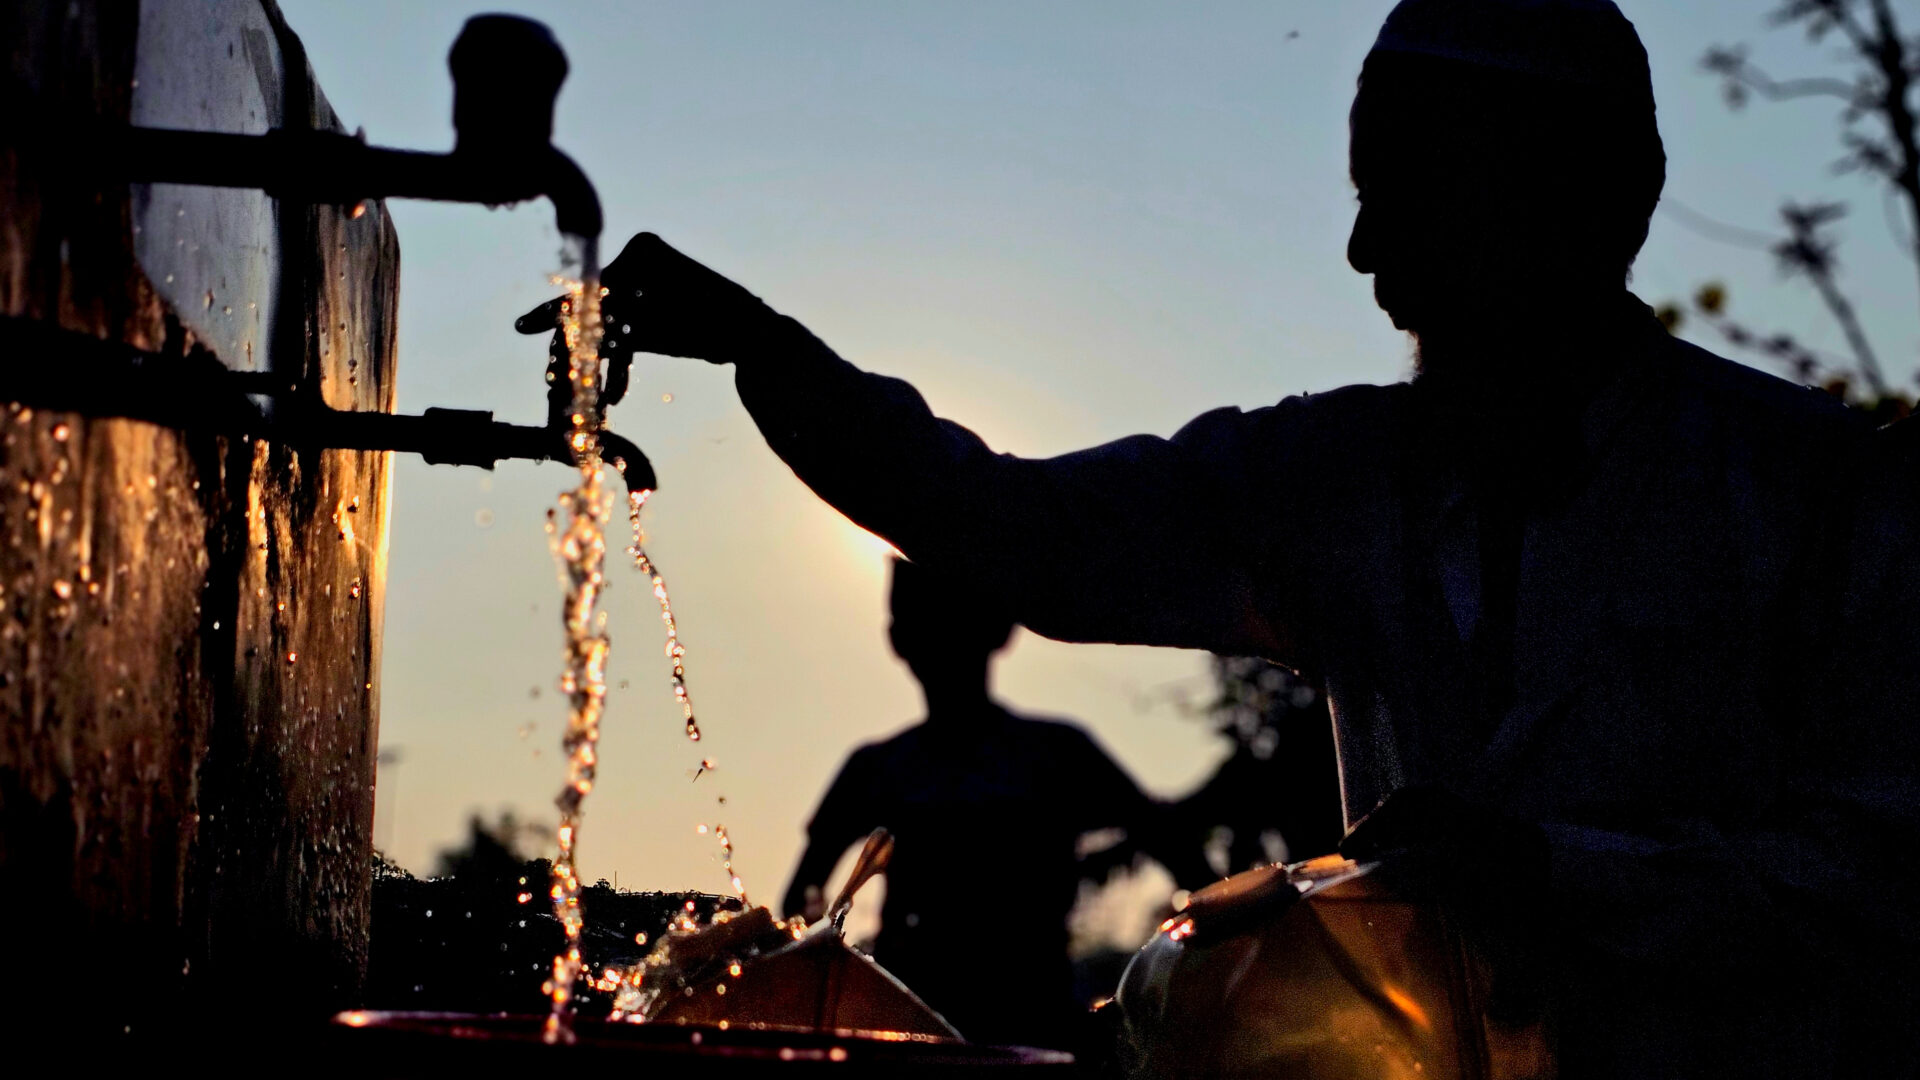 A man in a Rohingya refugee camp in Cox's Bazar, Bangladesh, draws water from a communal tap (Sahat Zia Hero)